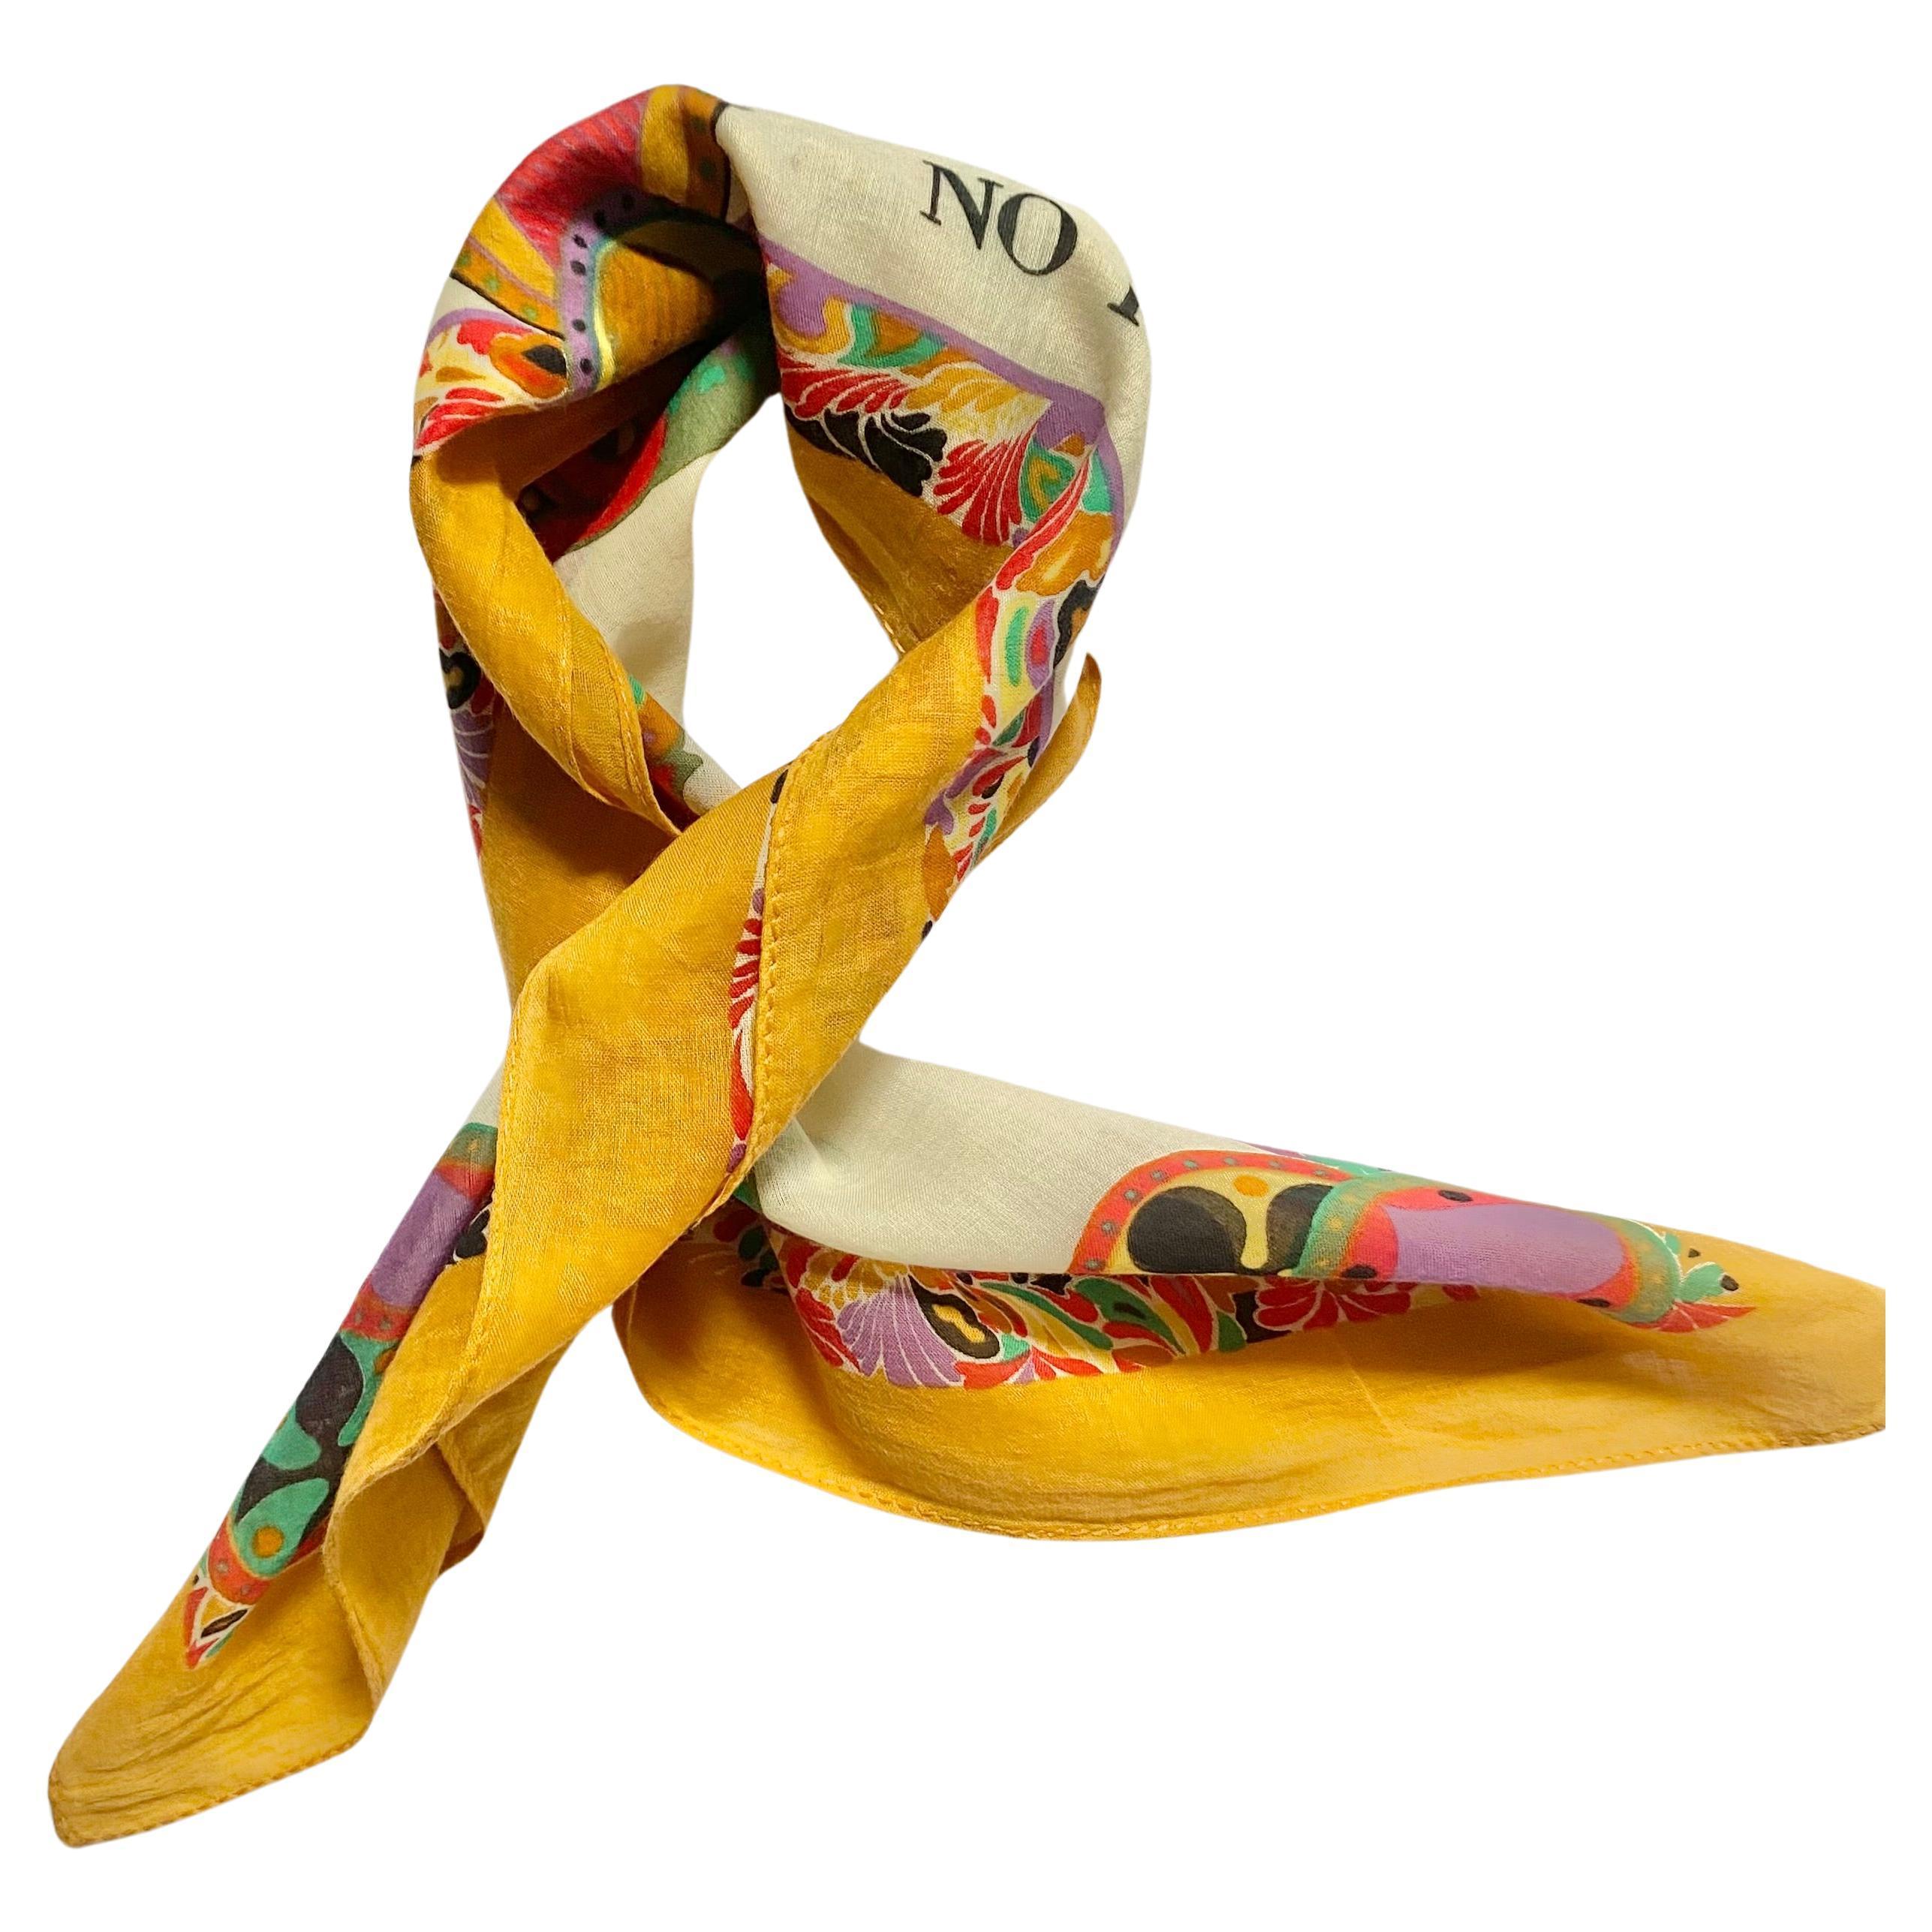 1990s Moschino No To Global Warming Scarf, cotton, multicolor graphics, in very good vintage condition
43x43cm - 17x17in